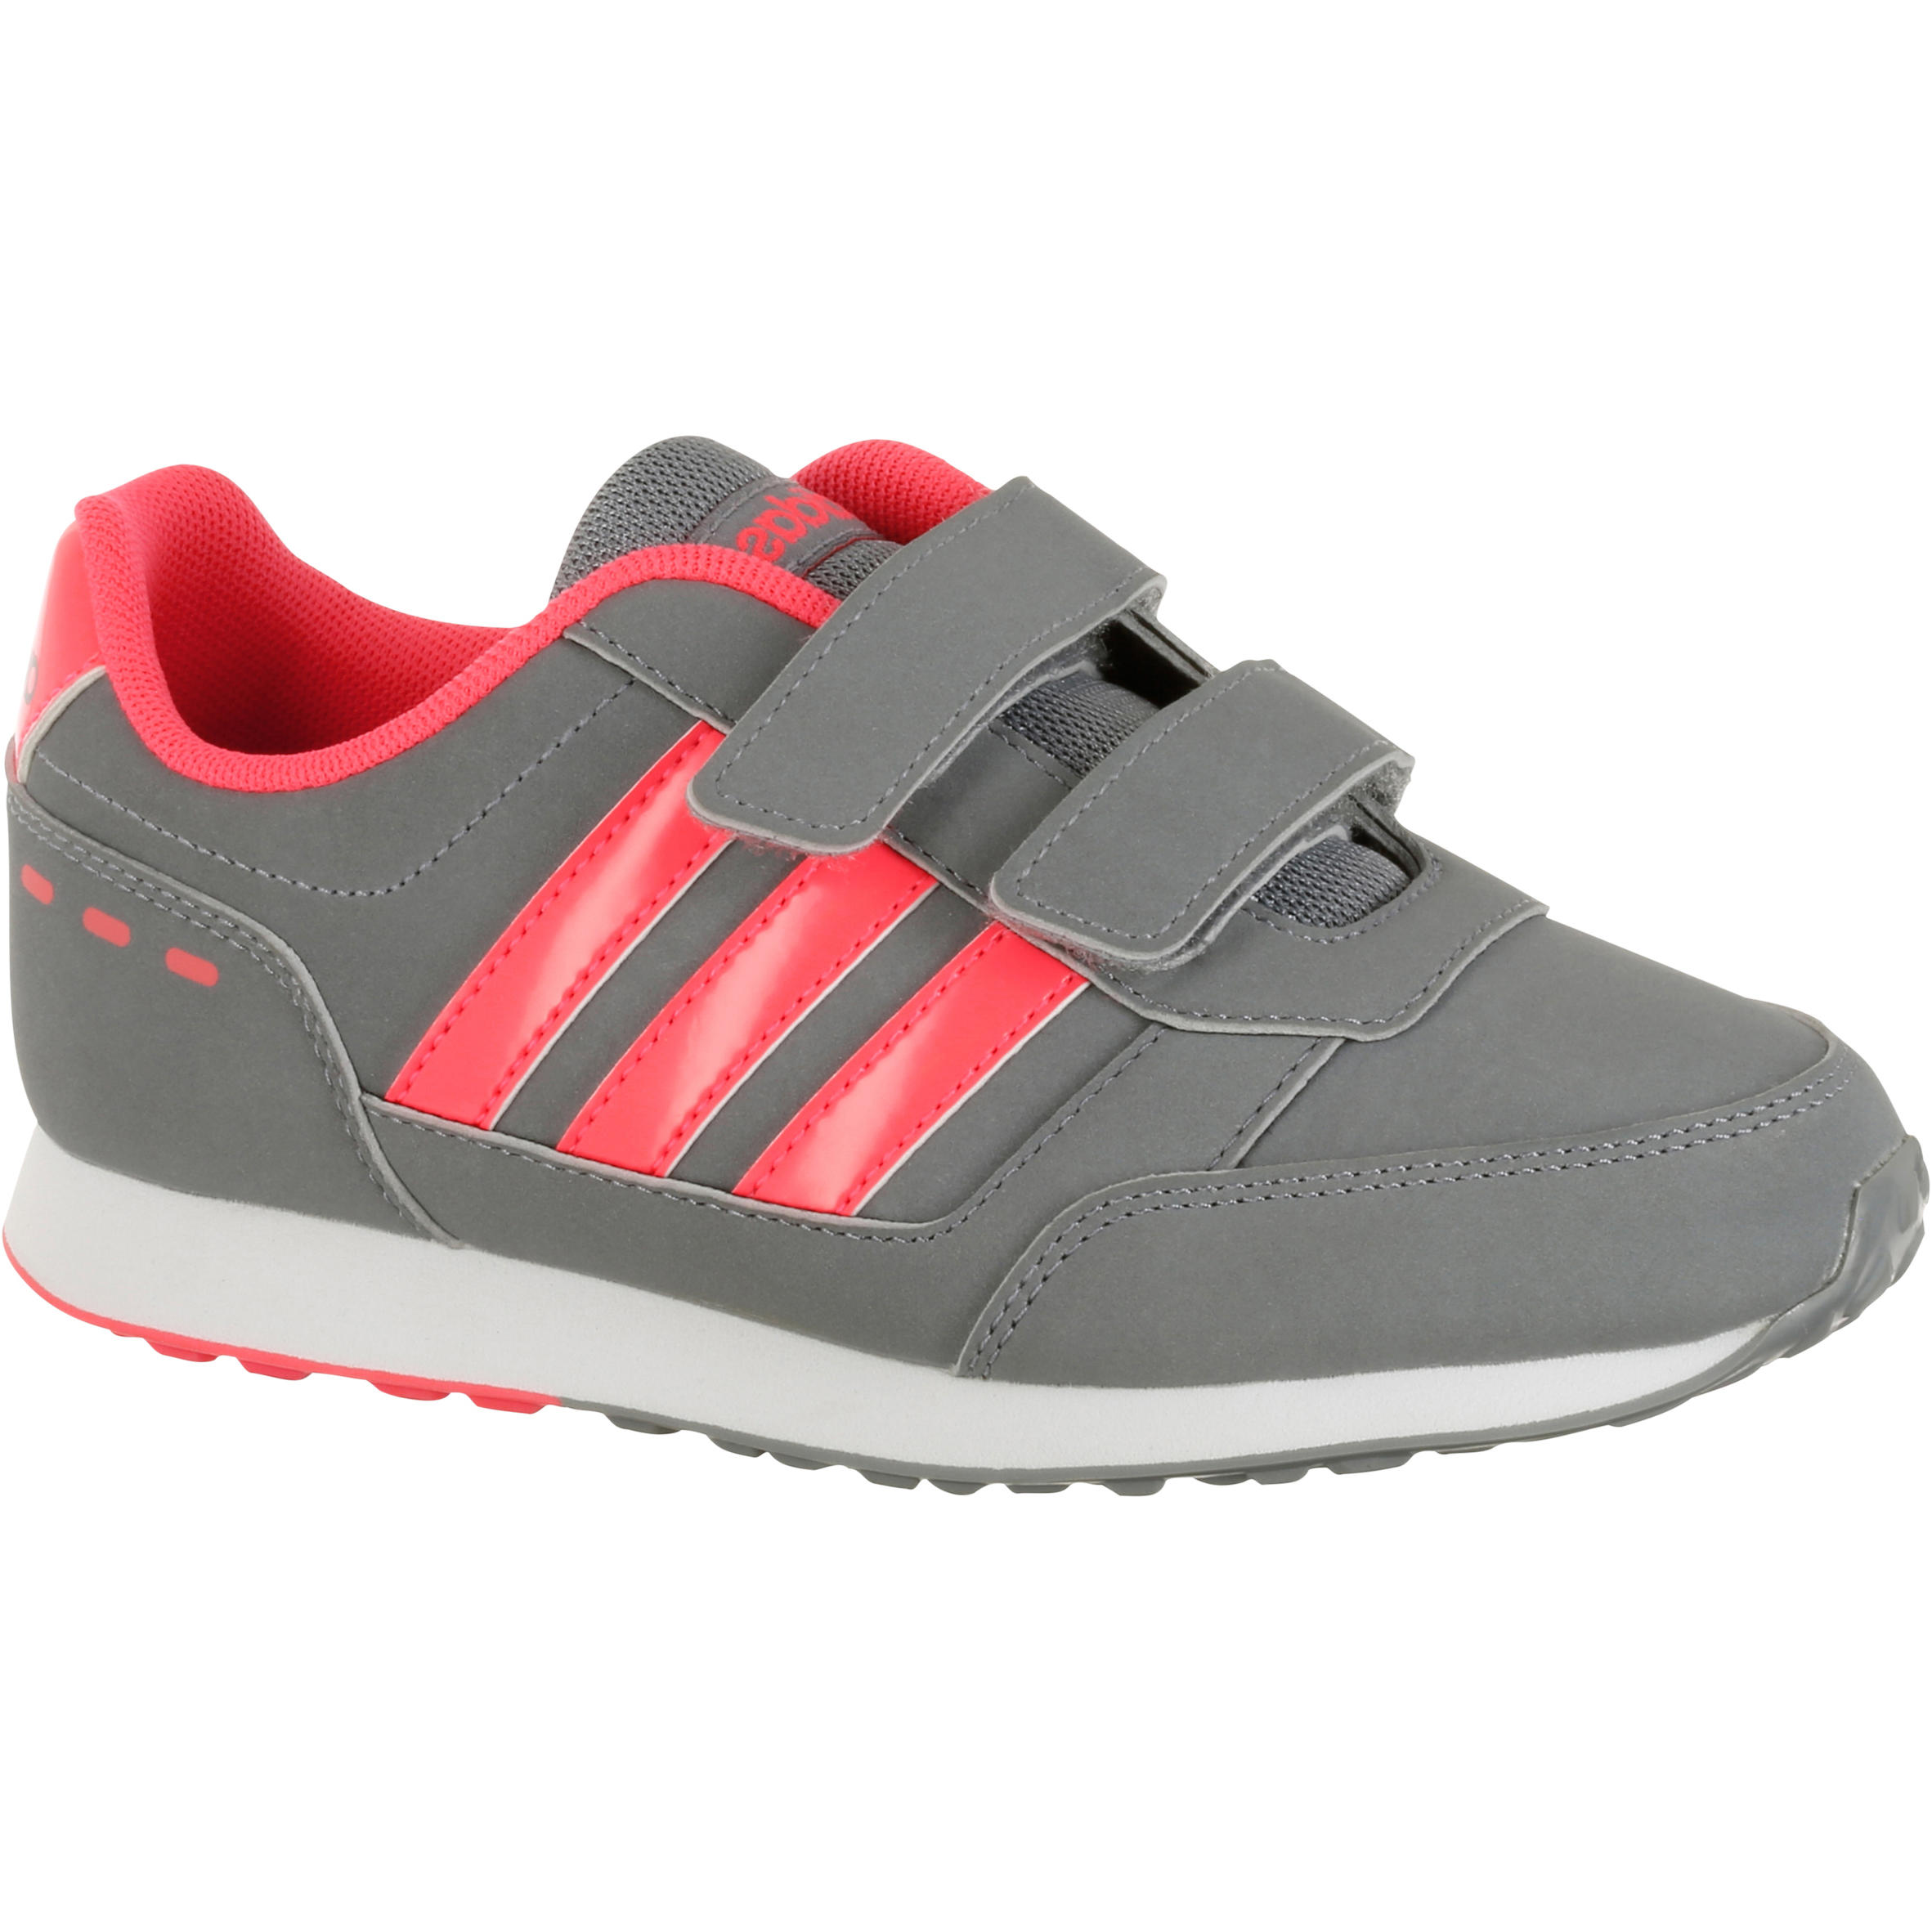 ADIDAS Switch children's fitness walking shoes grey/pink